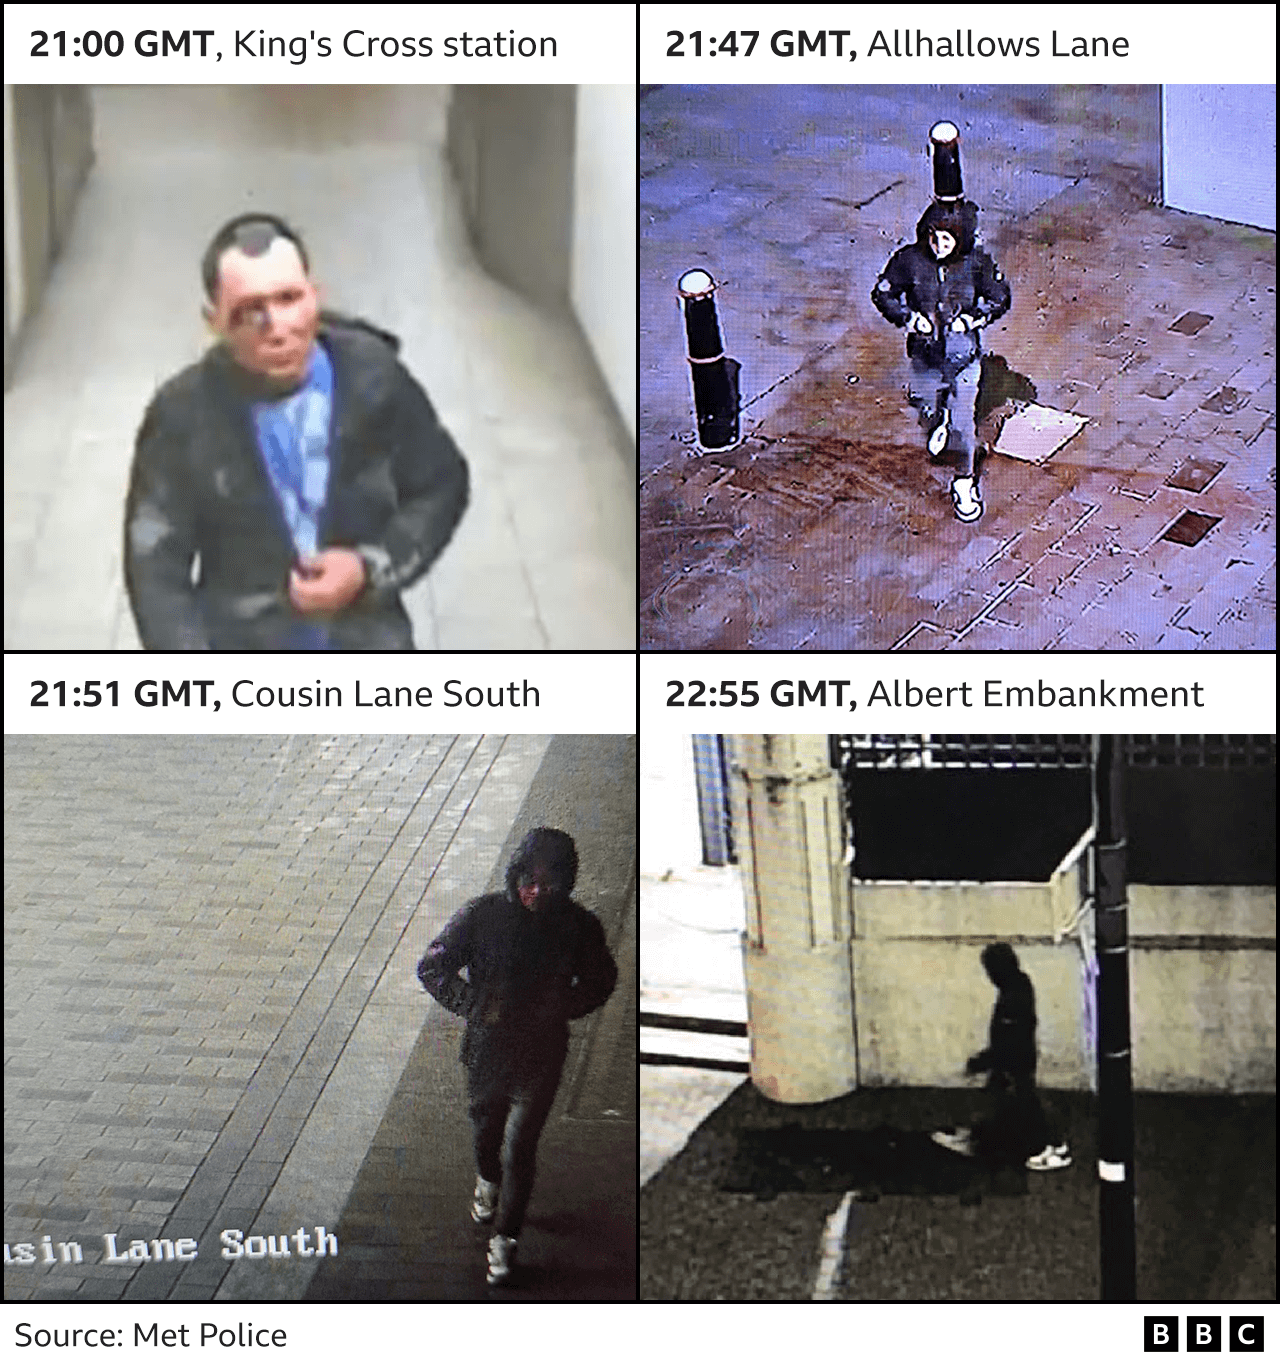 Four CCTV images of Ezidi at King's Cross station, Allhallows Lane, Cousin Lane South and Albert Embankment